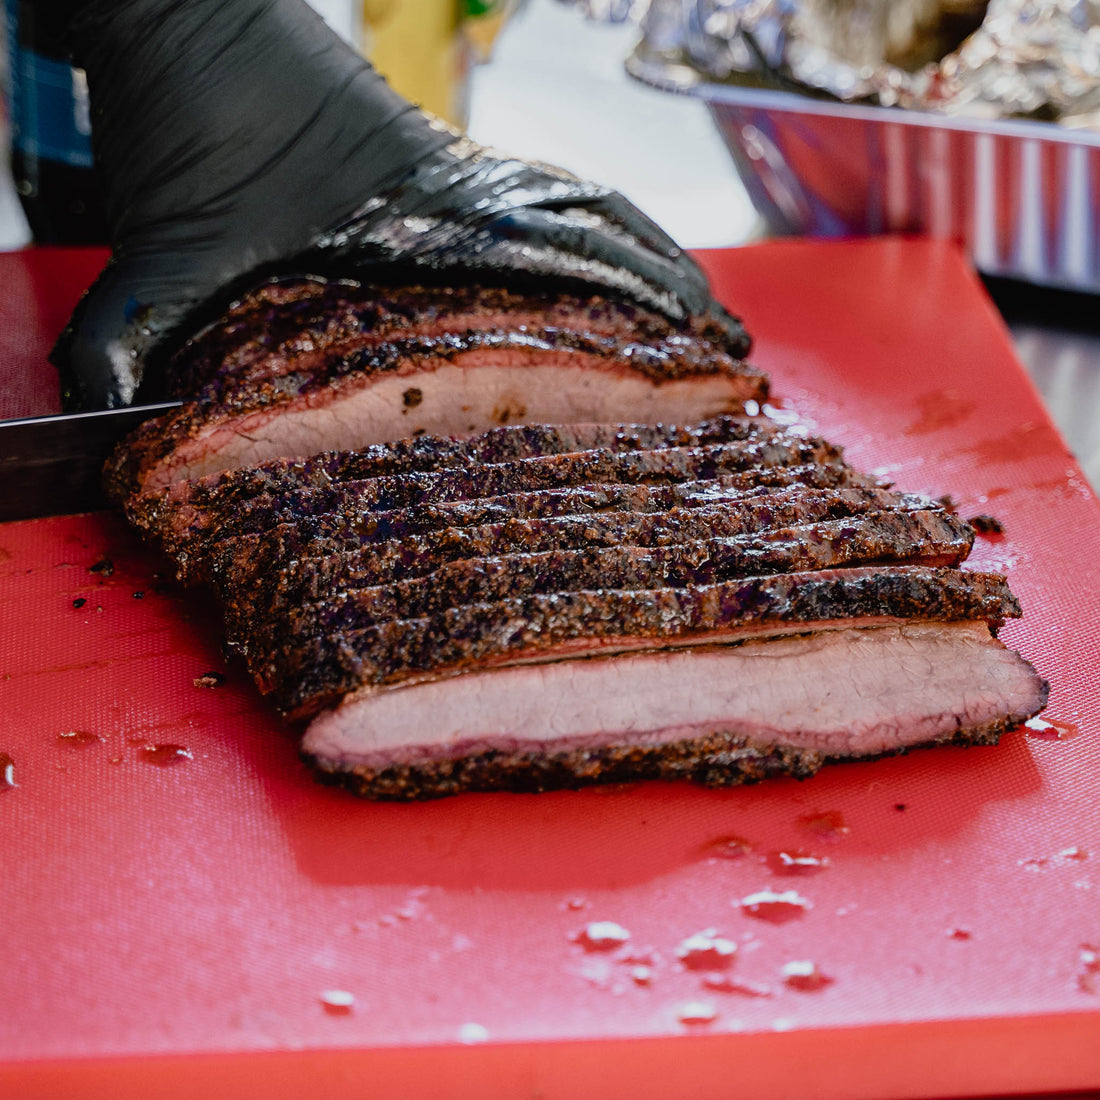 A close-up image of a slicing knife cutting through a tender, juicy brisket that has been reheated to perfection.